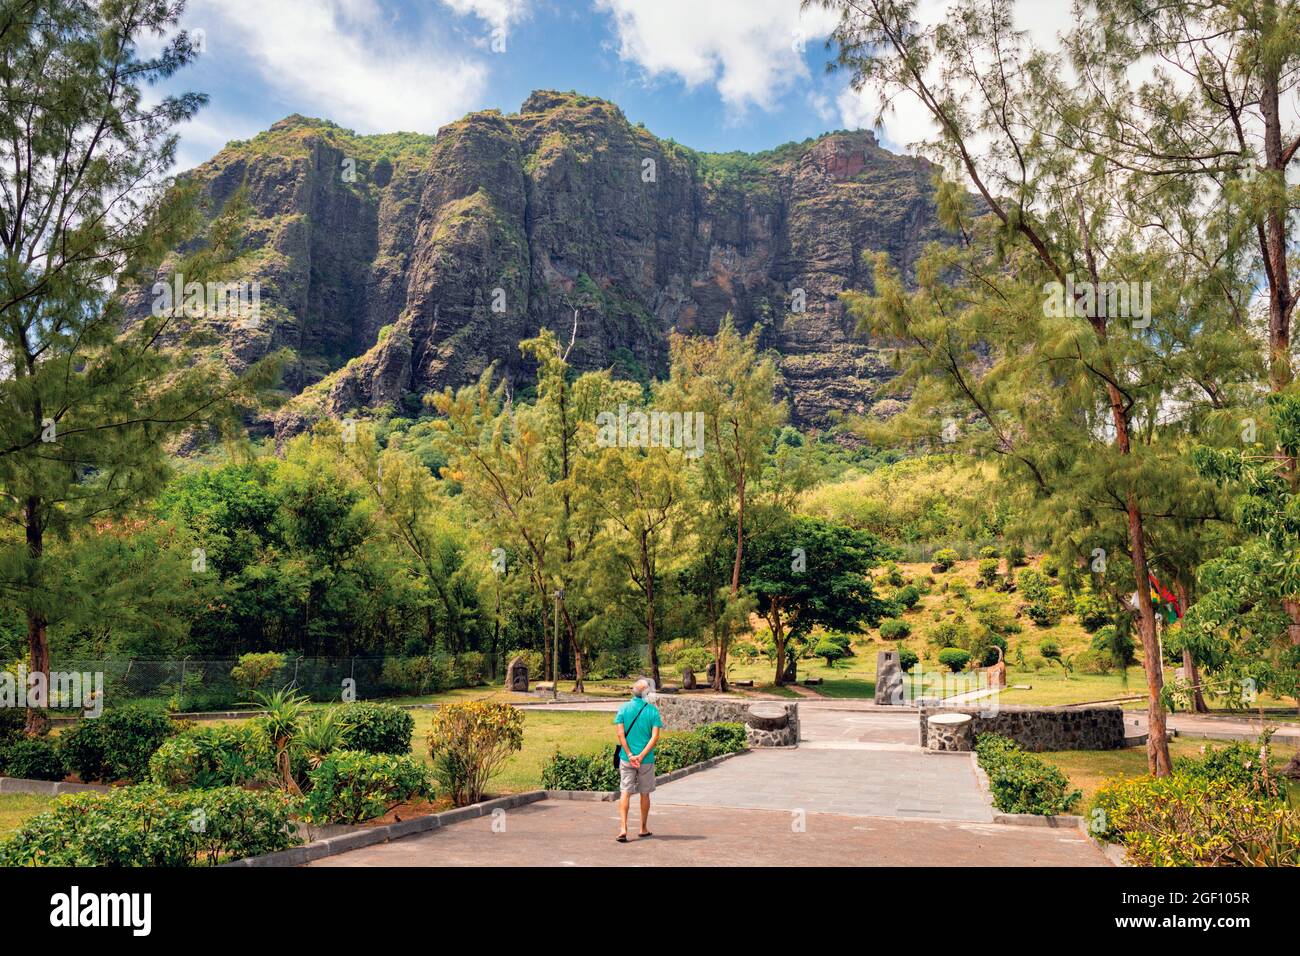 Mauritius, Mascarene Islands.  The Slave Route Monument at the foot of Le Morne Brabant mountain.  The mountain was used as a haven by escaped slaves. Stock Photo